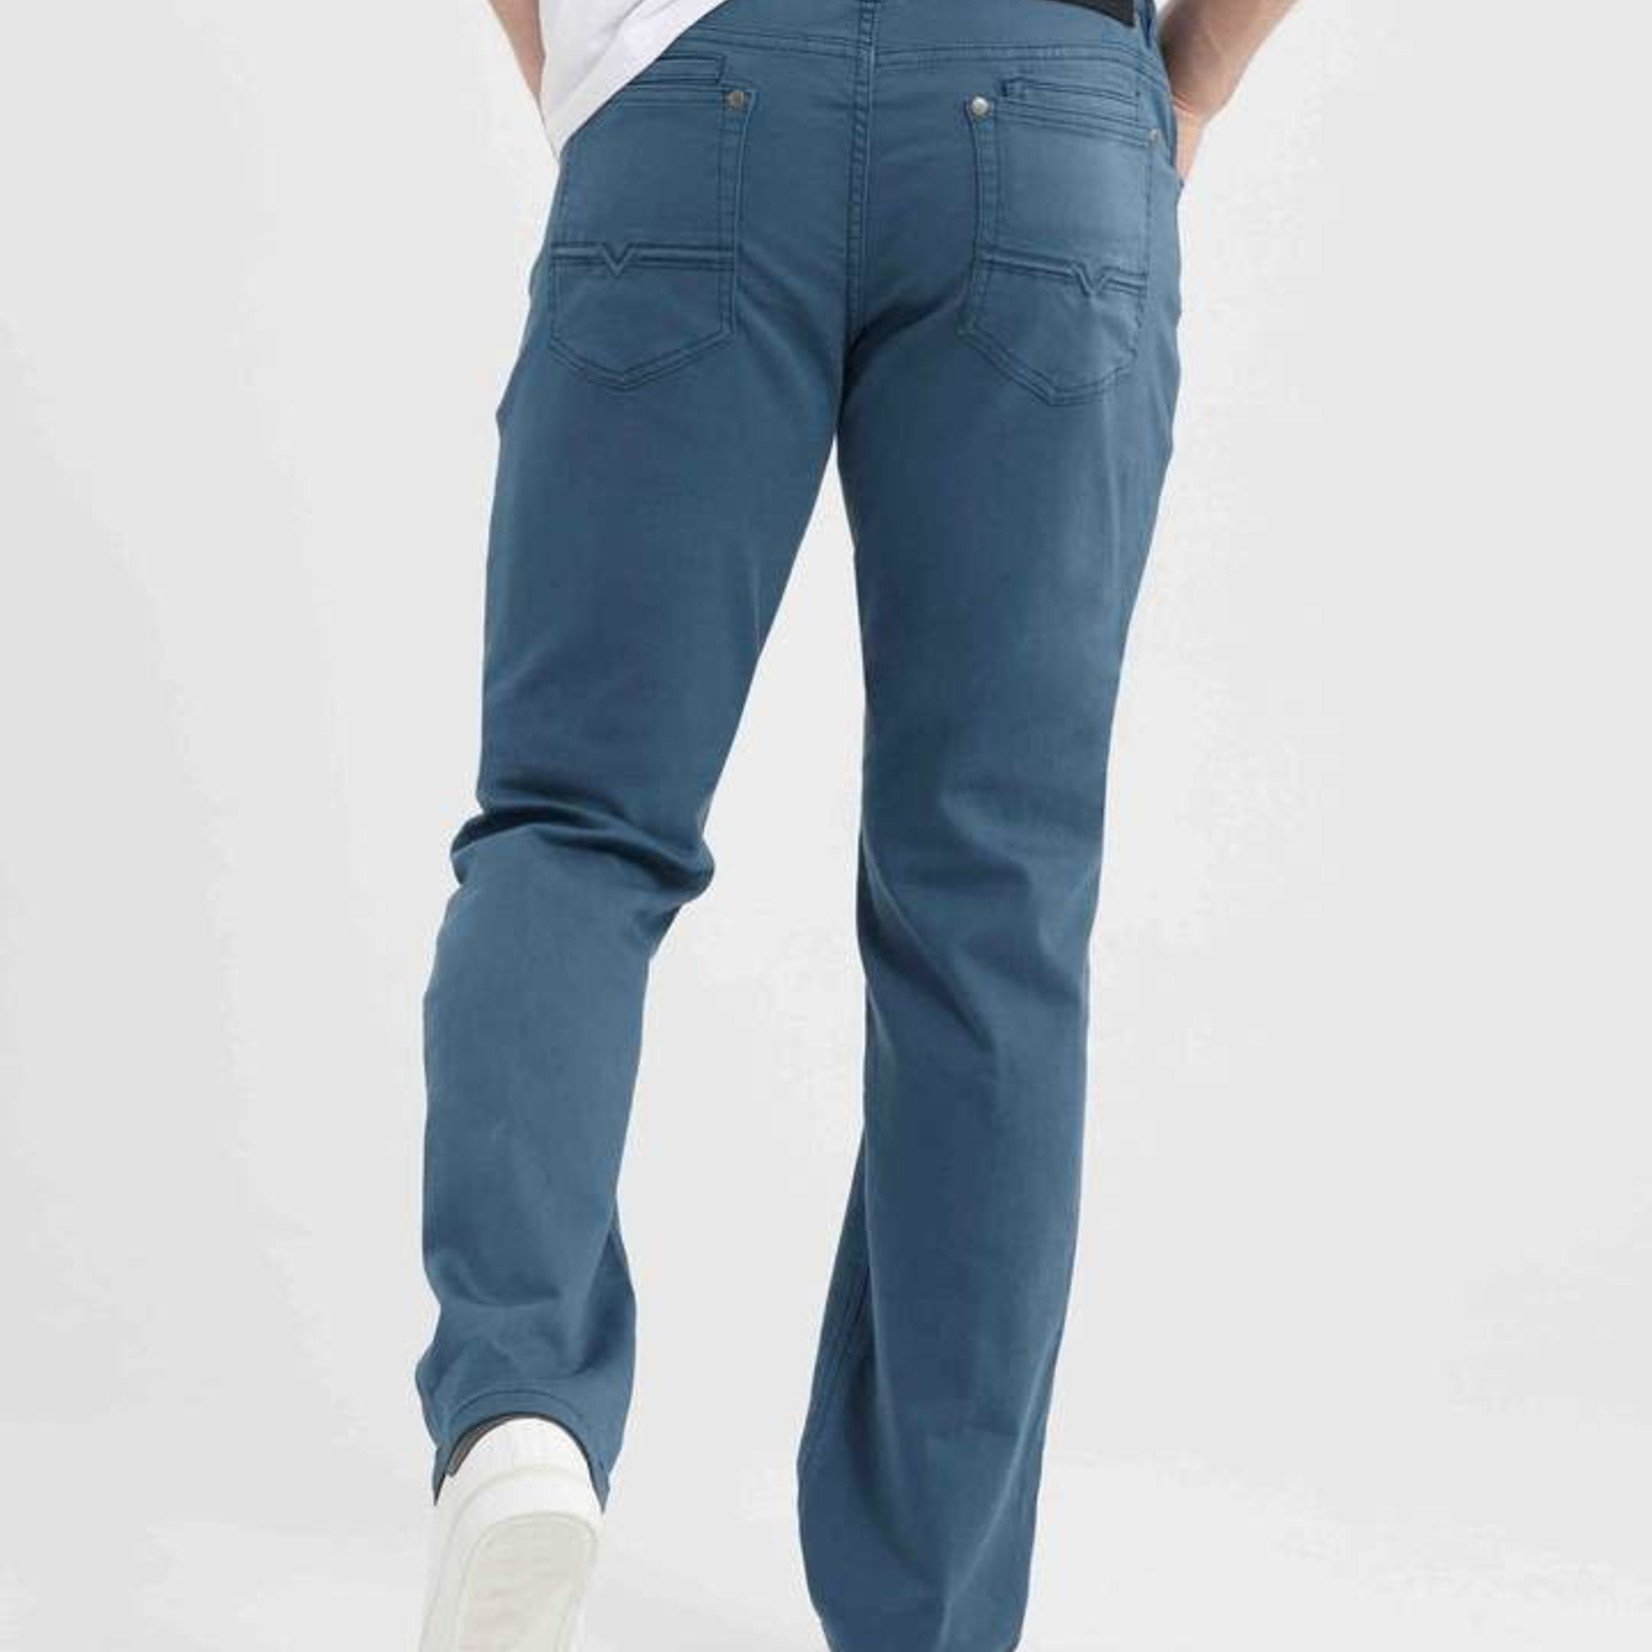 Lois Jeans Canada The "Mad 7700-86" by Lois Jeans